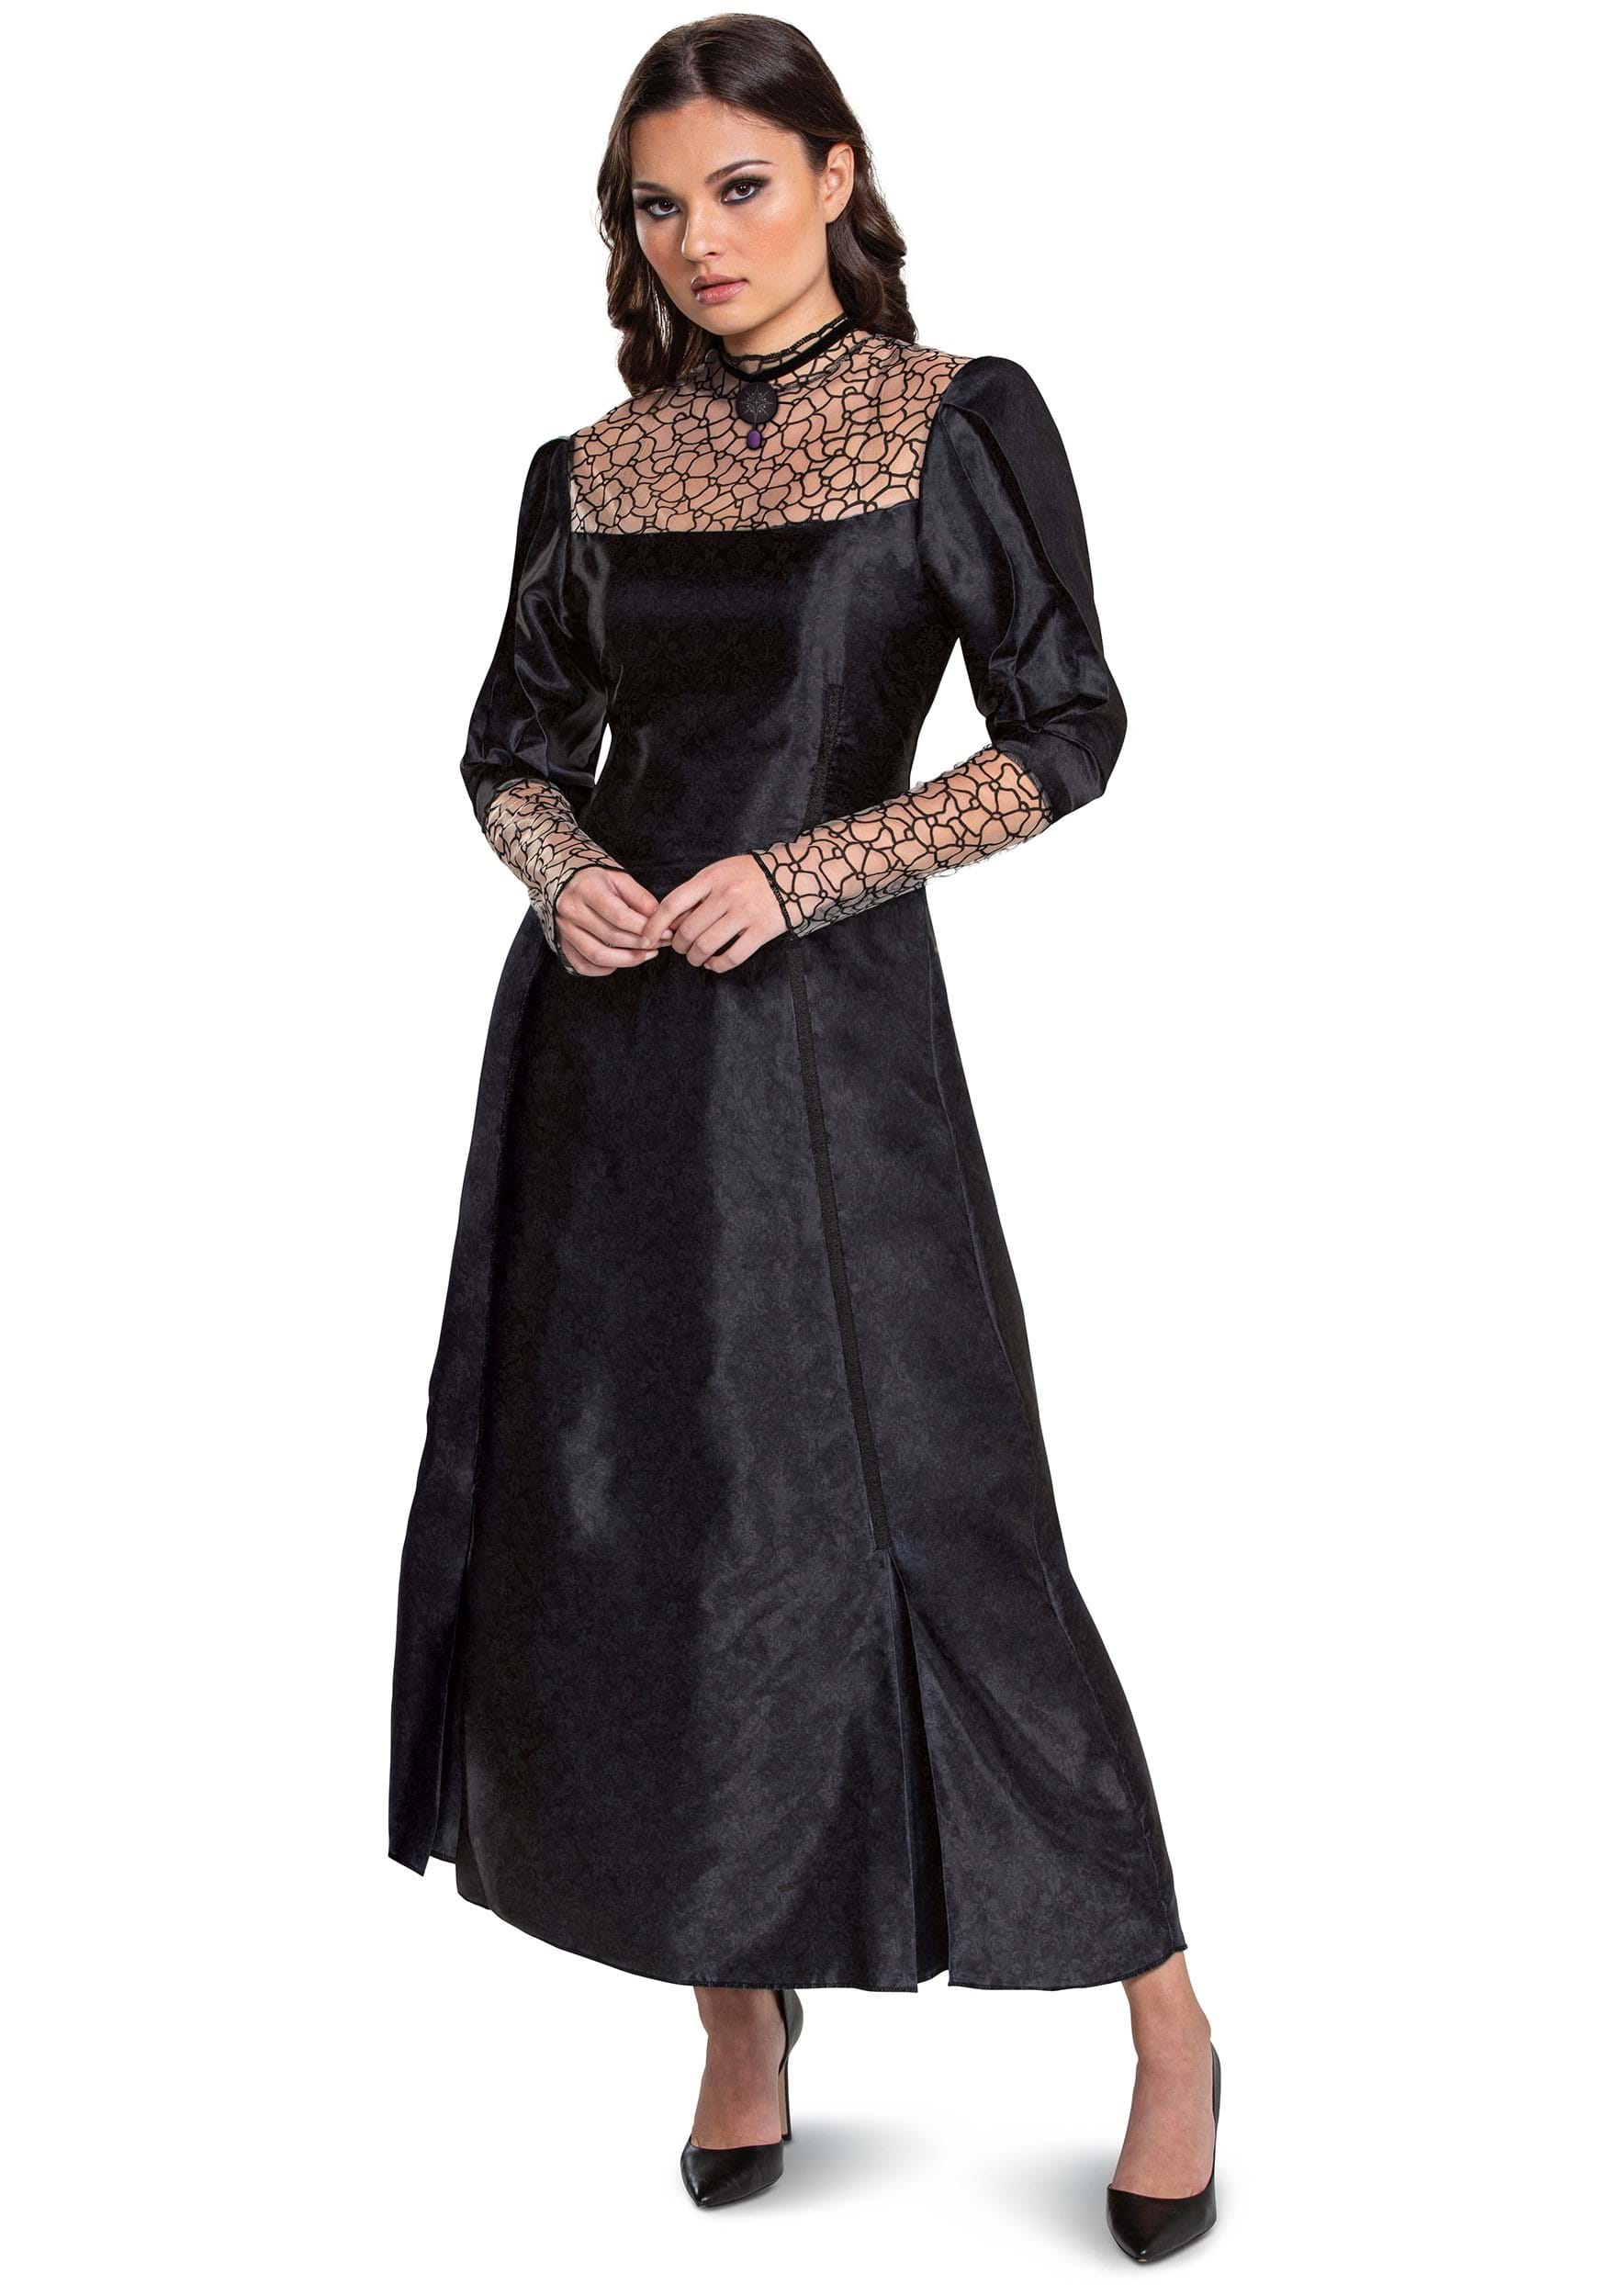 Womens The Witcher Classic Yennefer Costume